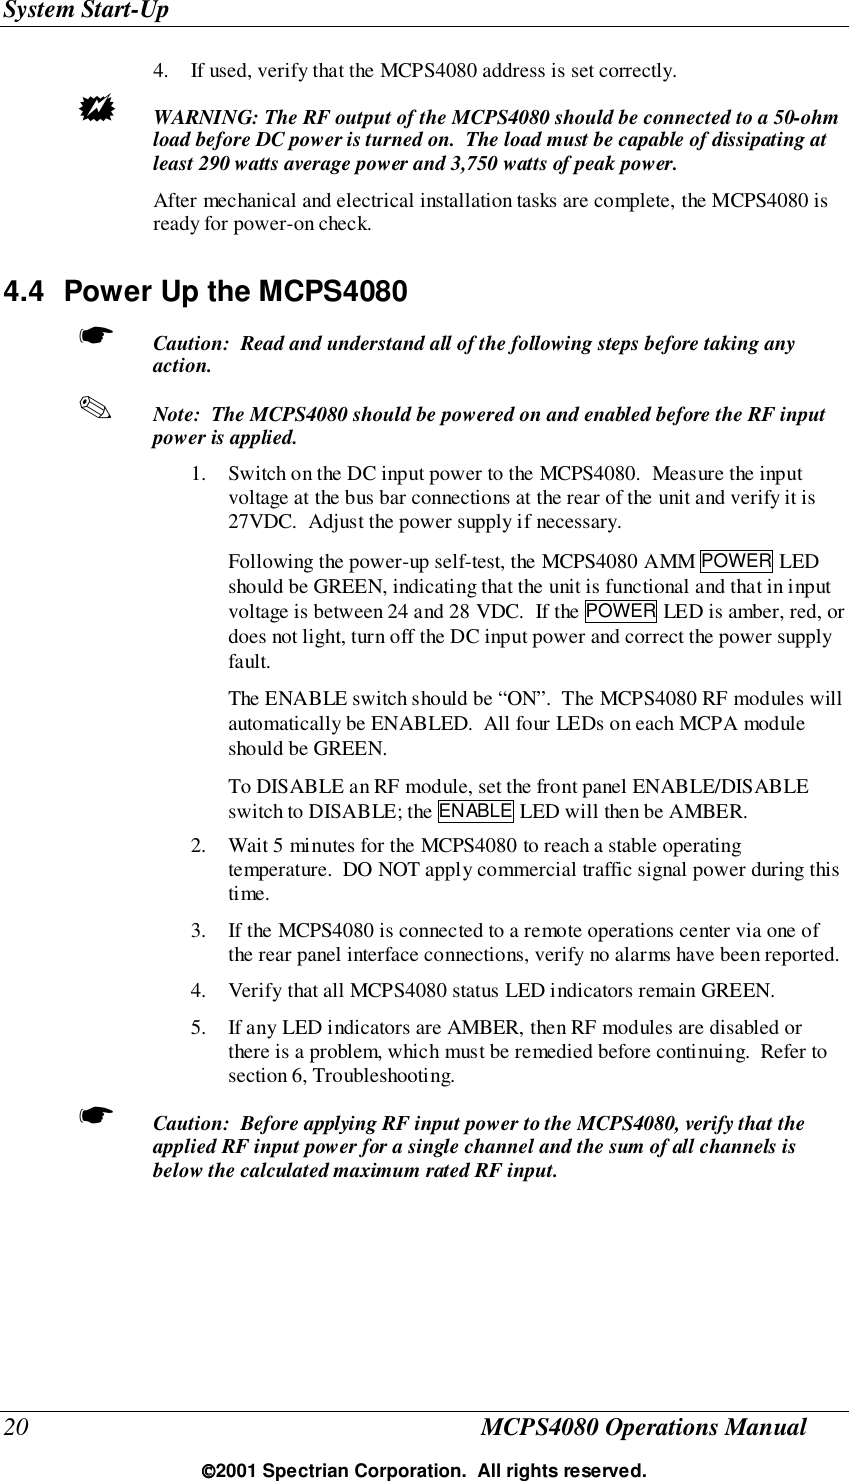 System Start-Up20 MCPS4080 Operations Manual2001 Spectrian Corporation.  All rights reserved.4. If used, verify that the MCPS4080 address is set correctly.! WARNING: The RF output of the MCPS4080 should be connected to a 50-ohmload before DC power is turned on.  The load must be capable of dissipating atleast 290 watts average power and 3,750 watts of peak power.After mechanical and electrical installation tasks are complete, the MCPS4080 isready for power-on check.4.4  Power Up the MCPS4080☛ Caution:  Read and understand all of the following steps before taking anyaction.✎ Note:  The MCPS4080 should be powered on and enabled before the RF inputpower is applied.1. Switch on the DC input power to the MCPS4080.  Measure the inputvoltage at the bus bar connections at the rear of the unit and verify it is27VDC.  Adjust the power supply if necessary.Following the power-up self-test, the MCPS4080 AMM POWER LEDshould be GREEN, indicating that the unit is functional and that in inputvoltage is between 24 and 28 VDC.  If the POWER LED is amber, red, ordoes not light, turn off the DC input power and correct the power supplyfault.The ENABLE switch should be “ON”.  The MCPS4080 RF modules willautomatically be ENABLED.  All four LEDs on each MCPA moduleshould be GREEN.To DISABLE an RF module, set the front panel ENABLE/DISABLEswitch to DISABLE; the ENABLE LED will then be AMBER.2. Wait 5 minutes for the MCPS4080 to reach a stable operatingtemperature.  DO NOT apply commercial traffic signal power during thistime.3. If the MCPS4080 is connected to a remote operations center via one ofthe rear panel interface connections, verify no alarms have been reported.4. Verify that all MCPS4080 status LED indicators remain GREEN.5. If any LED indicators are AMBER, then RF modules are disabled orthere is a problem, which must be remedied before continuing.  Refer tosection 6, Troubleshooting.☛ Caution:  Before applying RF input power to the MCPS4080, verify that theapplied RF input power for a single channel and the sum of all channels isbelow the calculated maximum rated RF input.